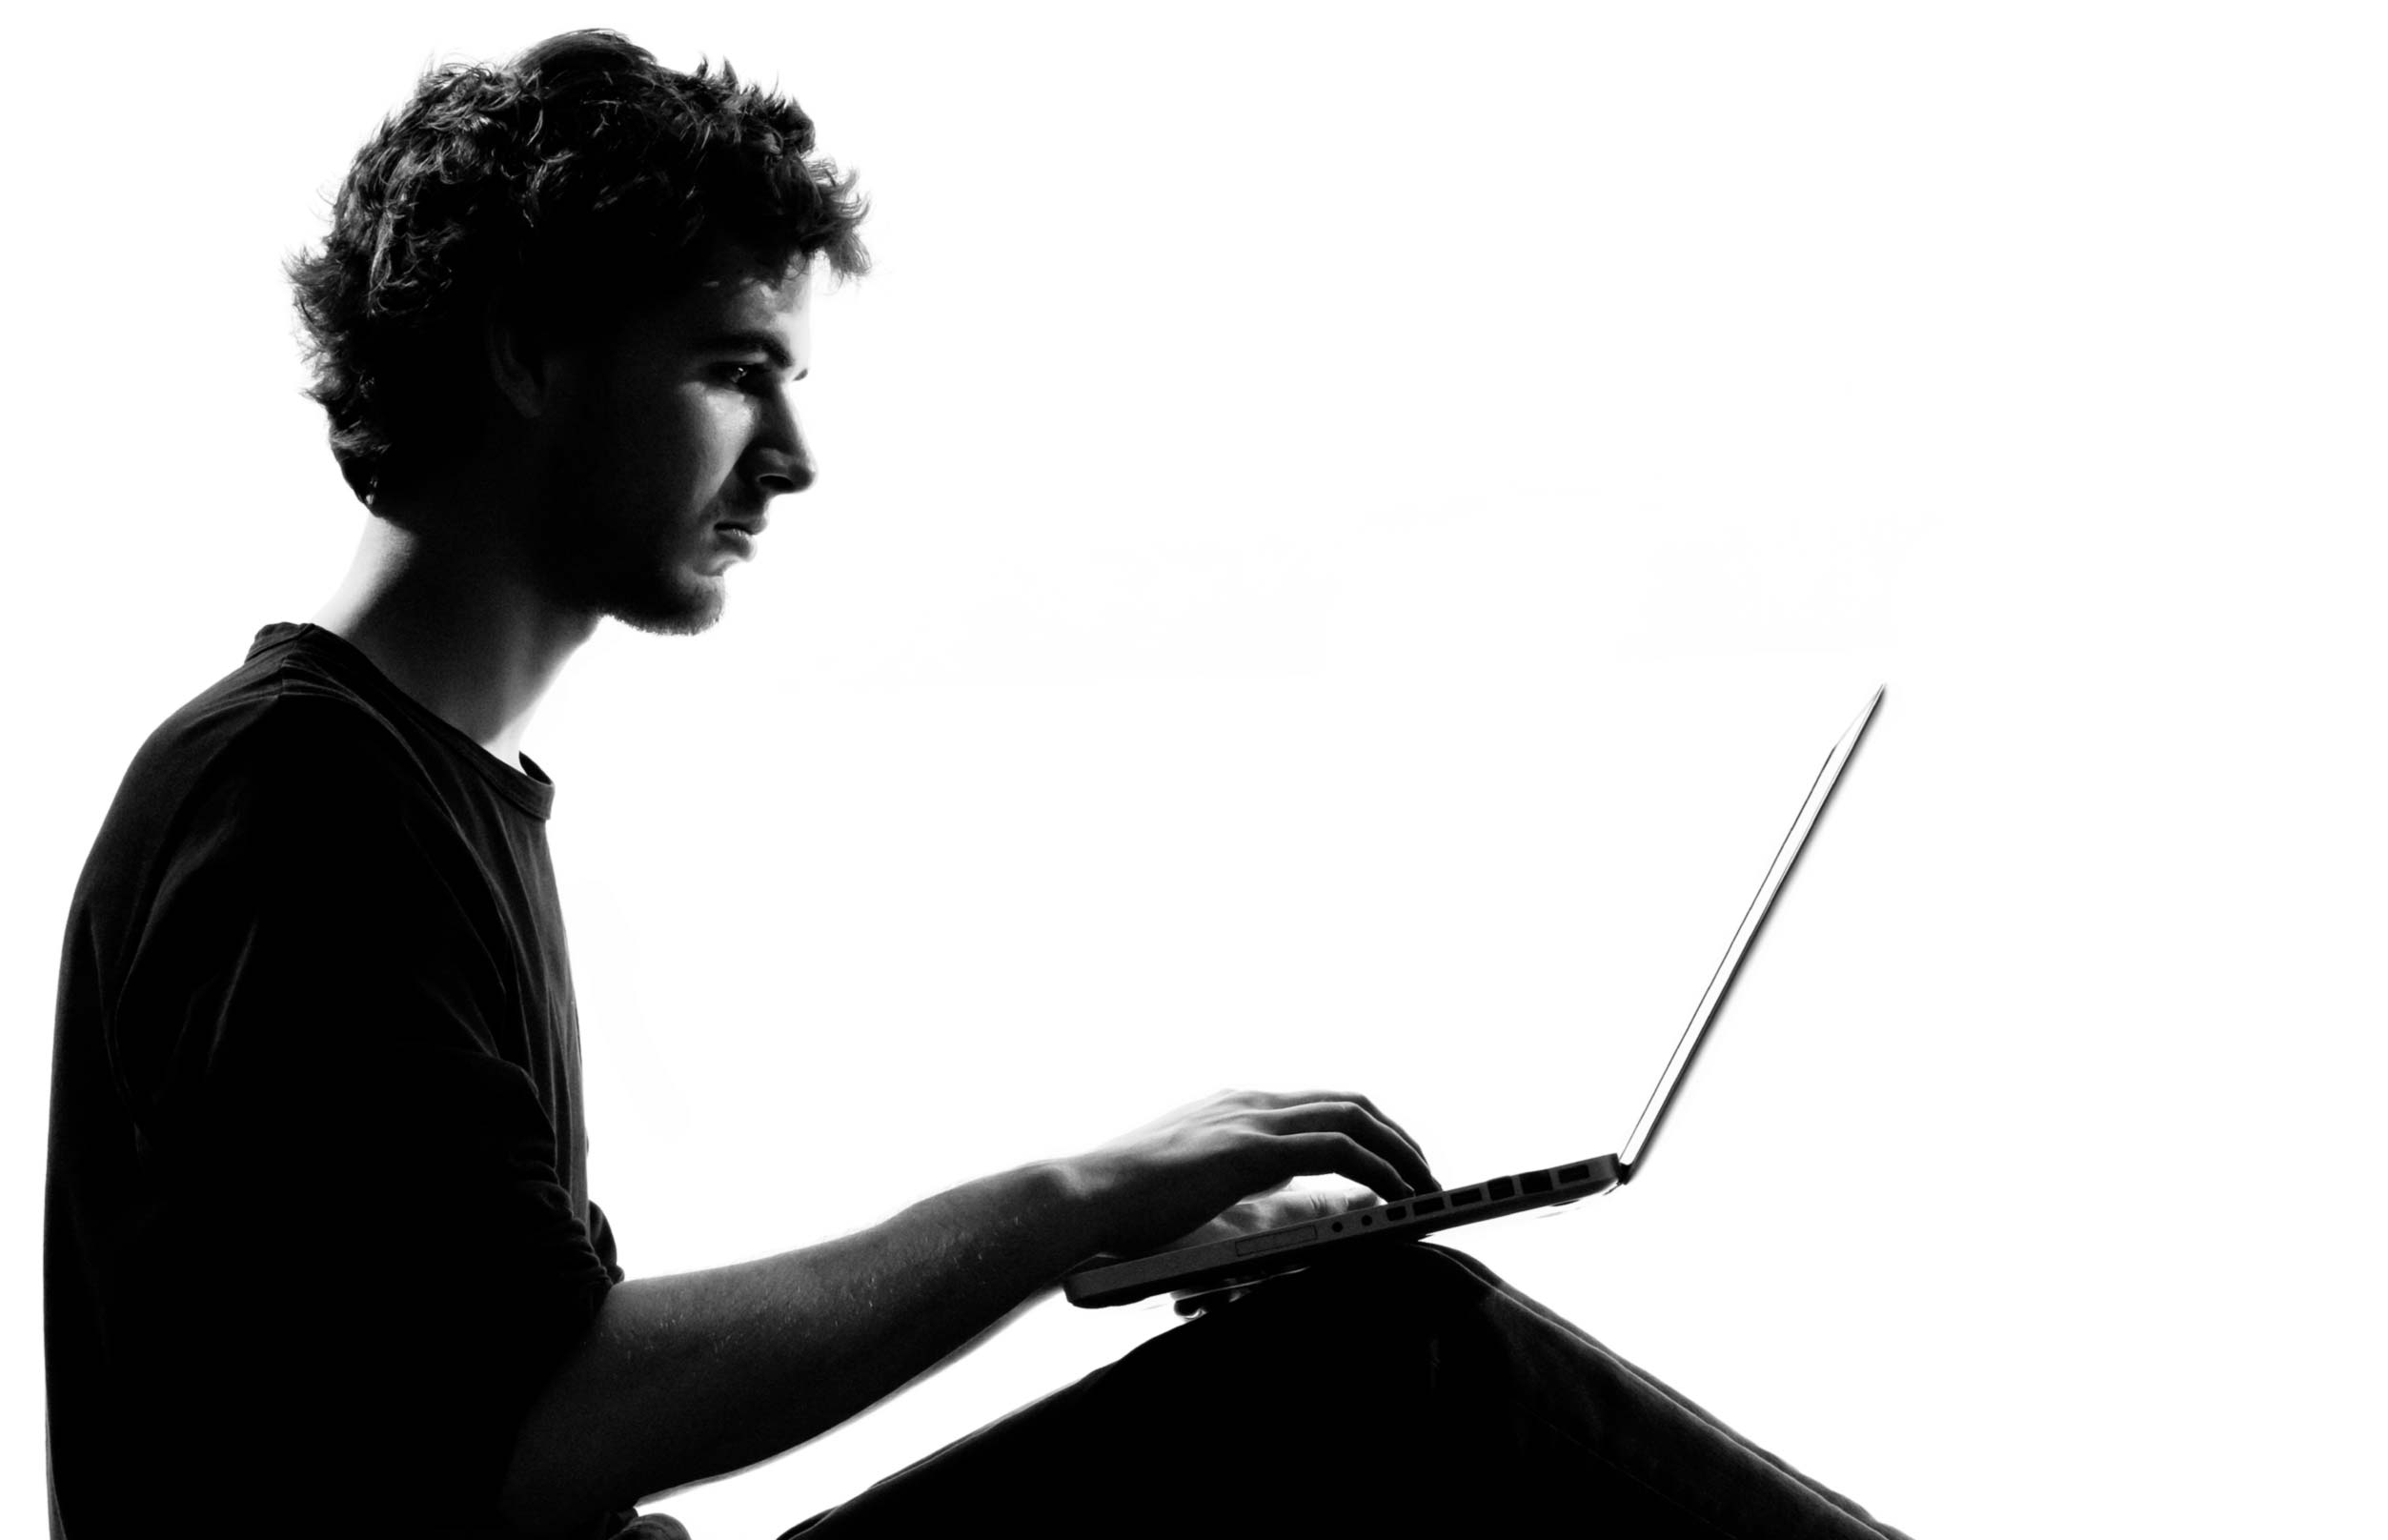 physiotherapy solutions - image of a man on Laptop